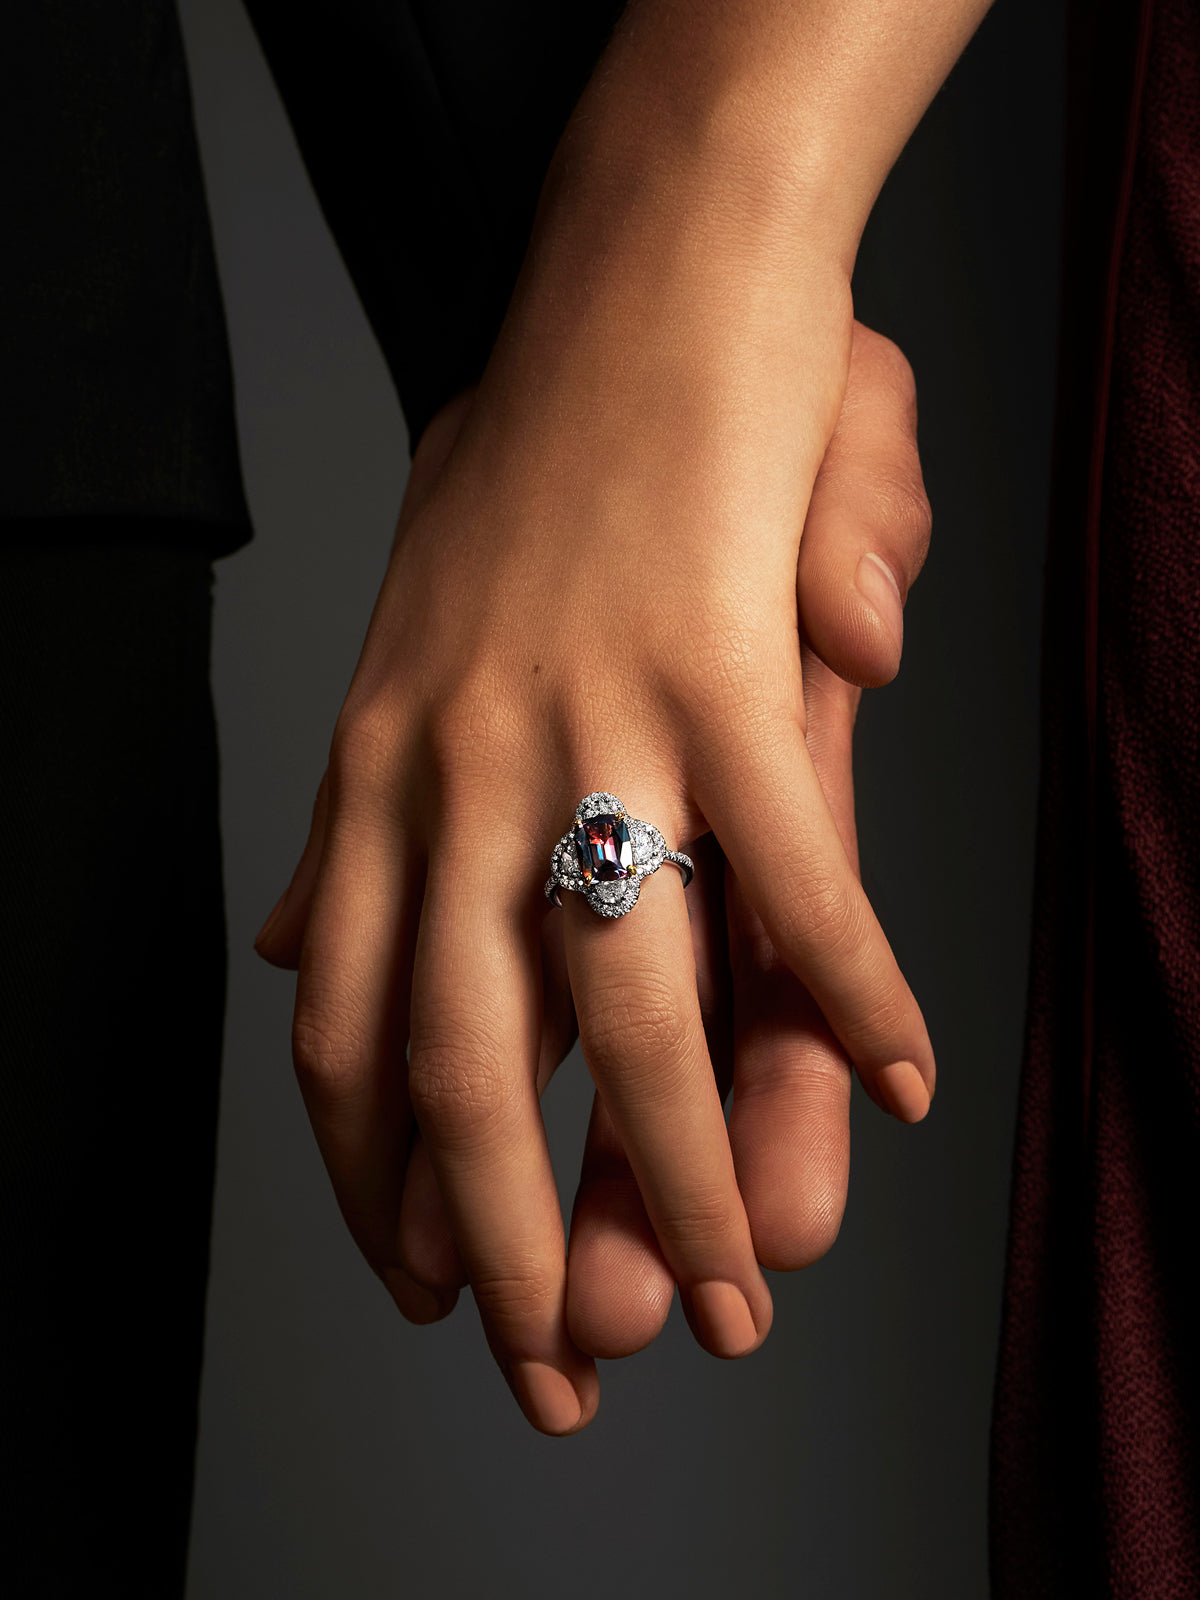 High Jewelry Half Moon Clover Alexandrite Ring set in 18k White Gold on a Model's Hand